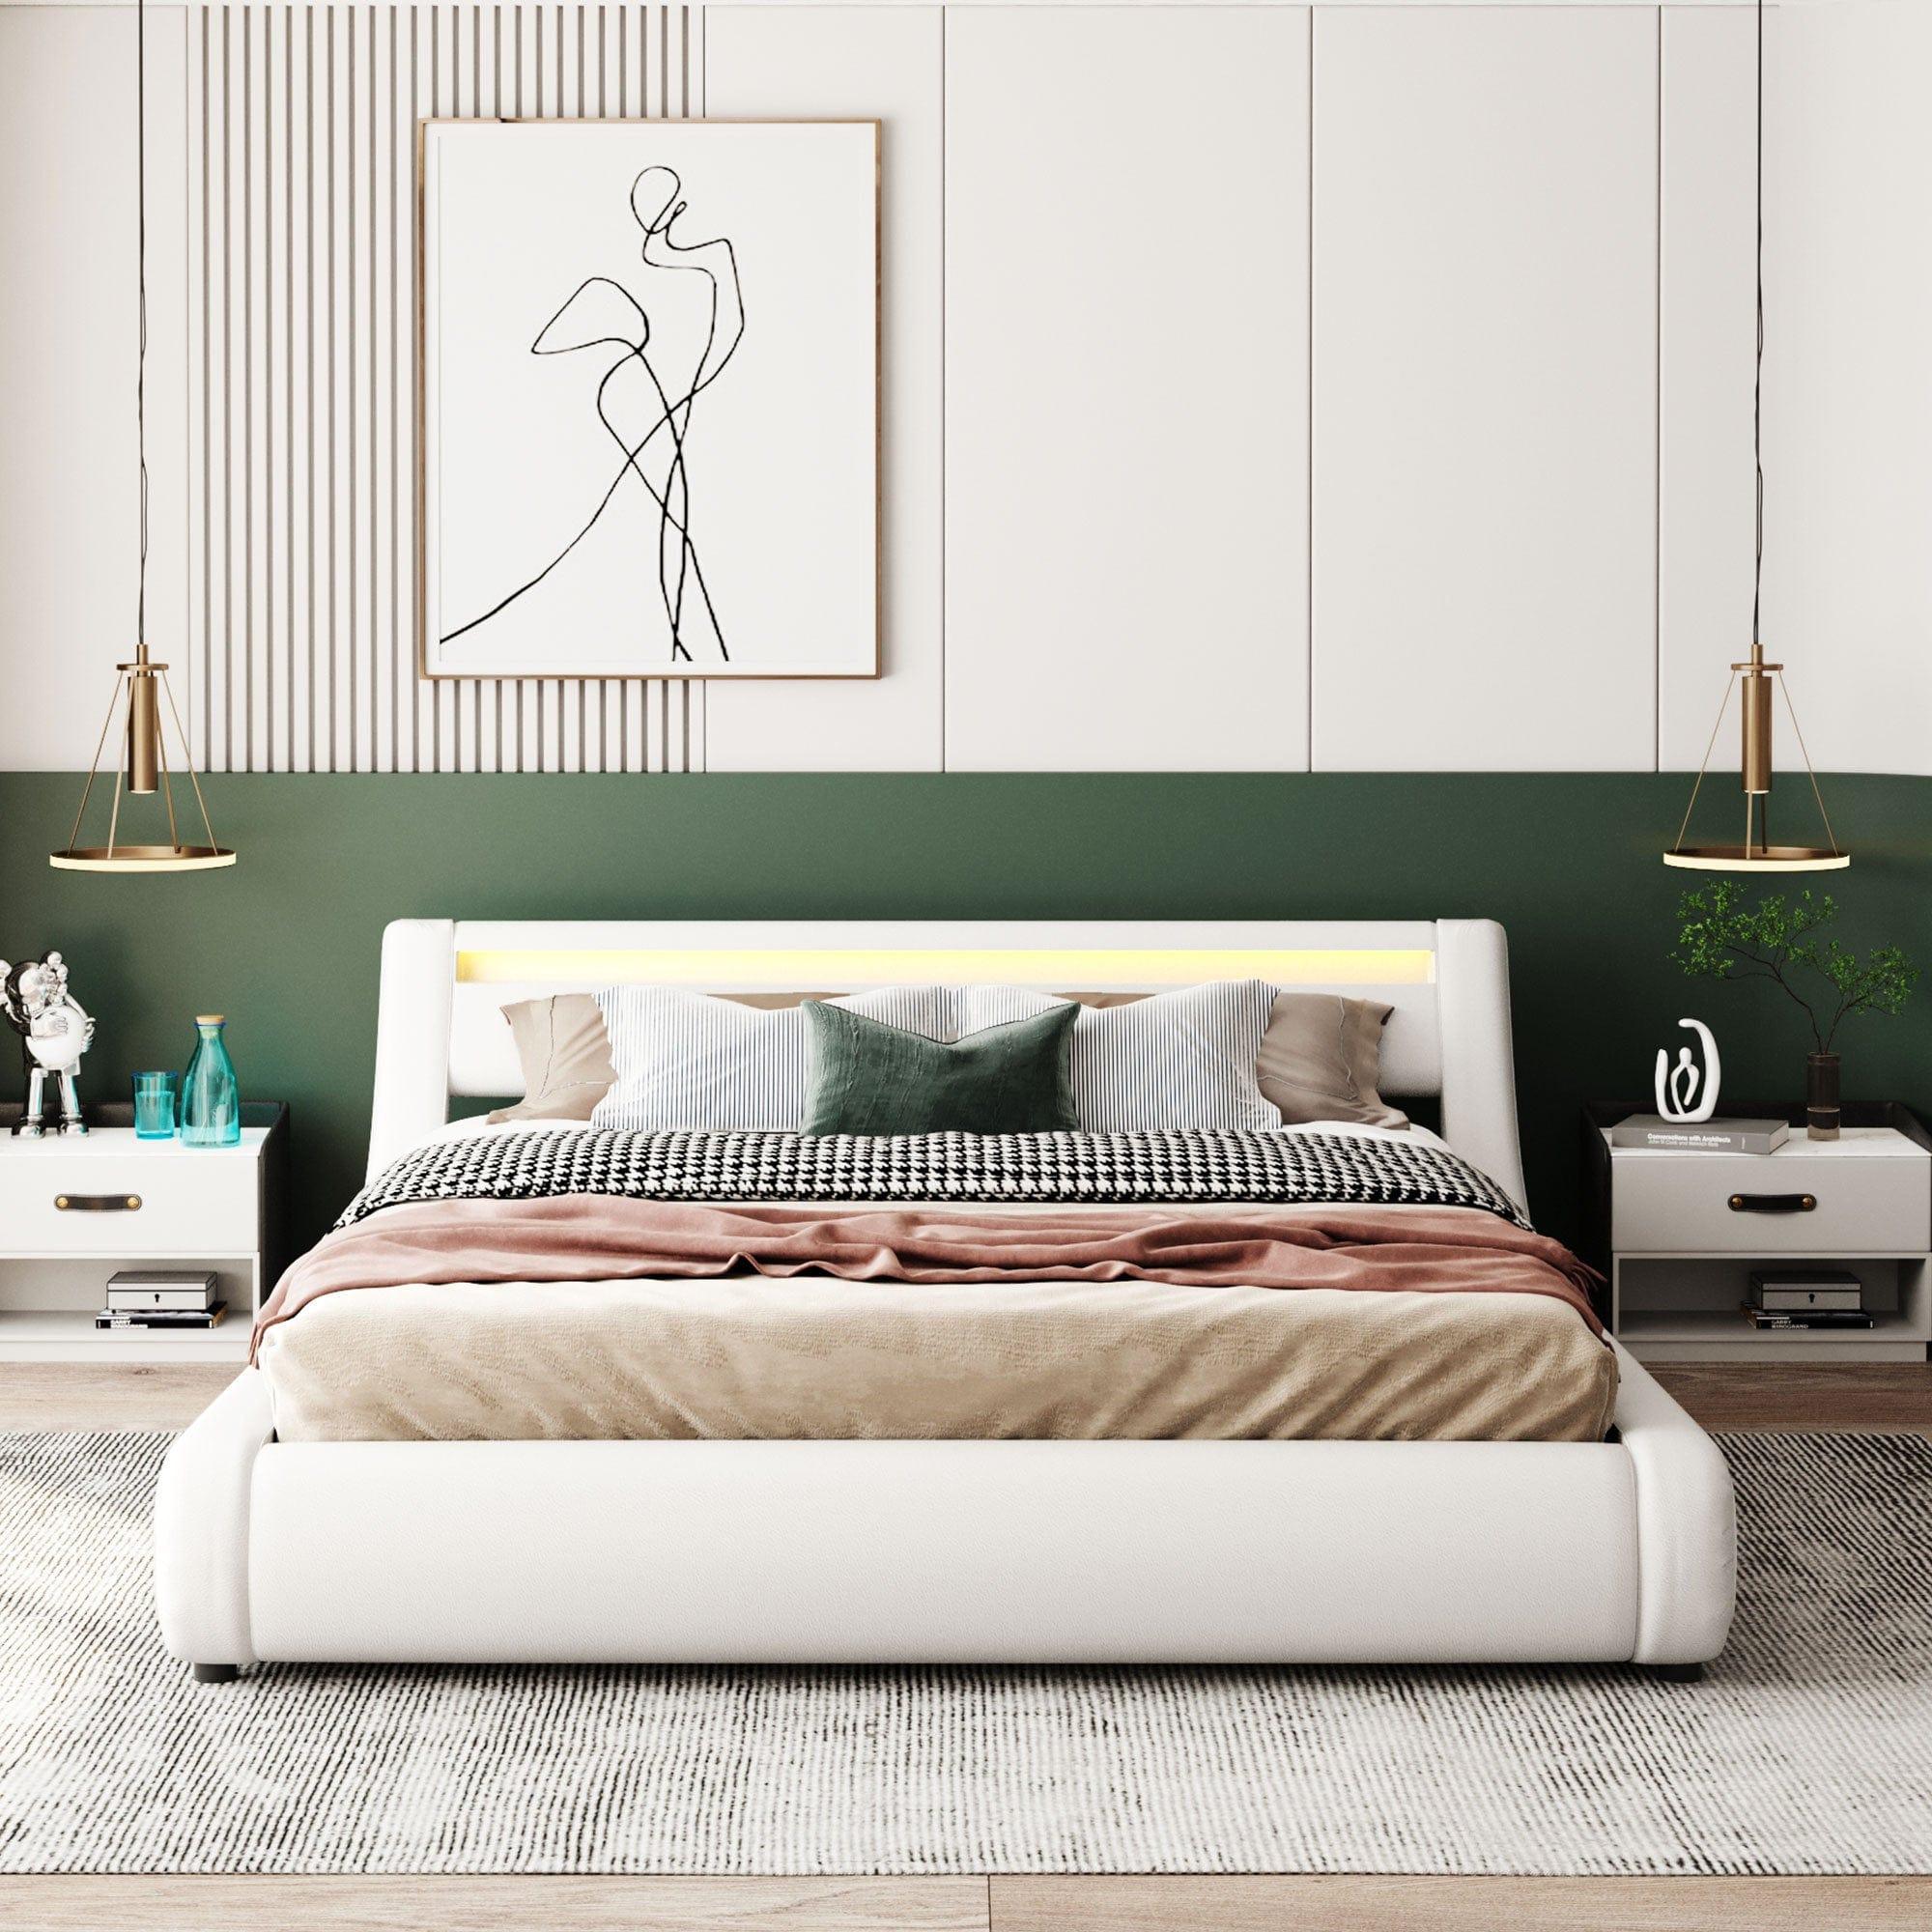 Shop Upholstered Faux Leather Platform bed with a Hydraulic Storage System with LED Light Headboard Bed Frame with Slatted Queen Size Mademoiselle Home Decor